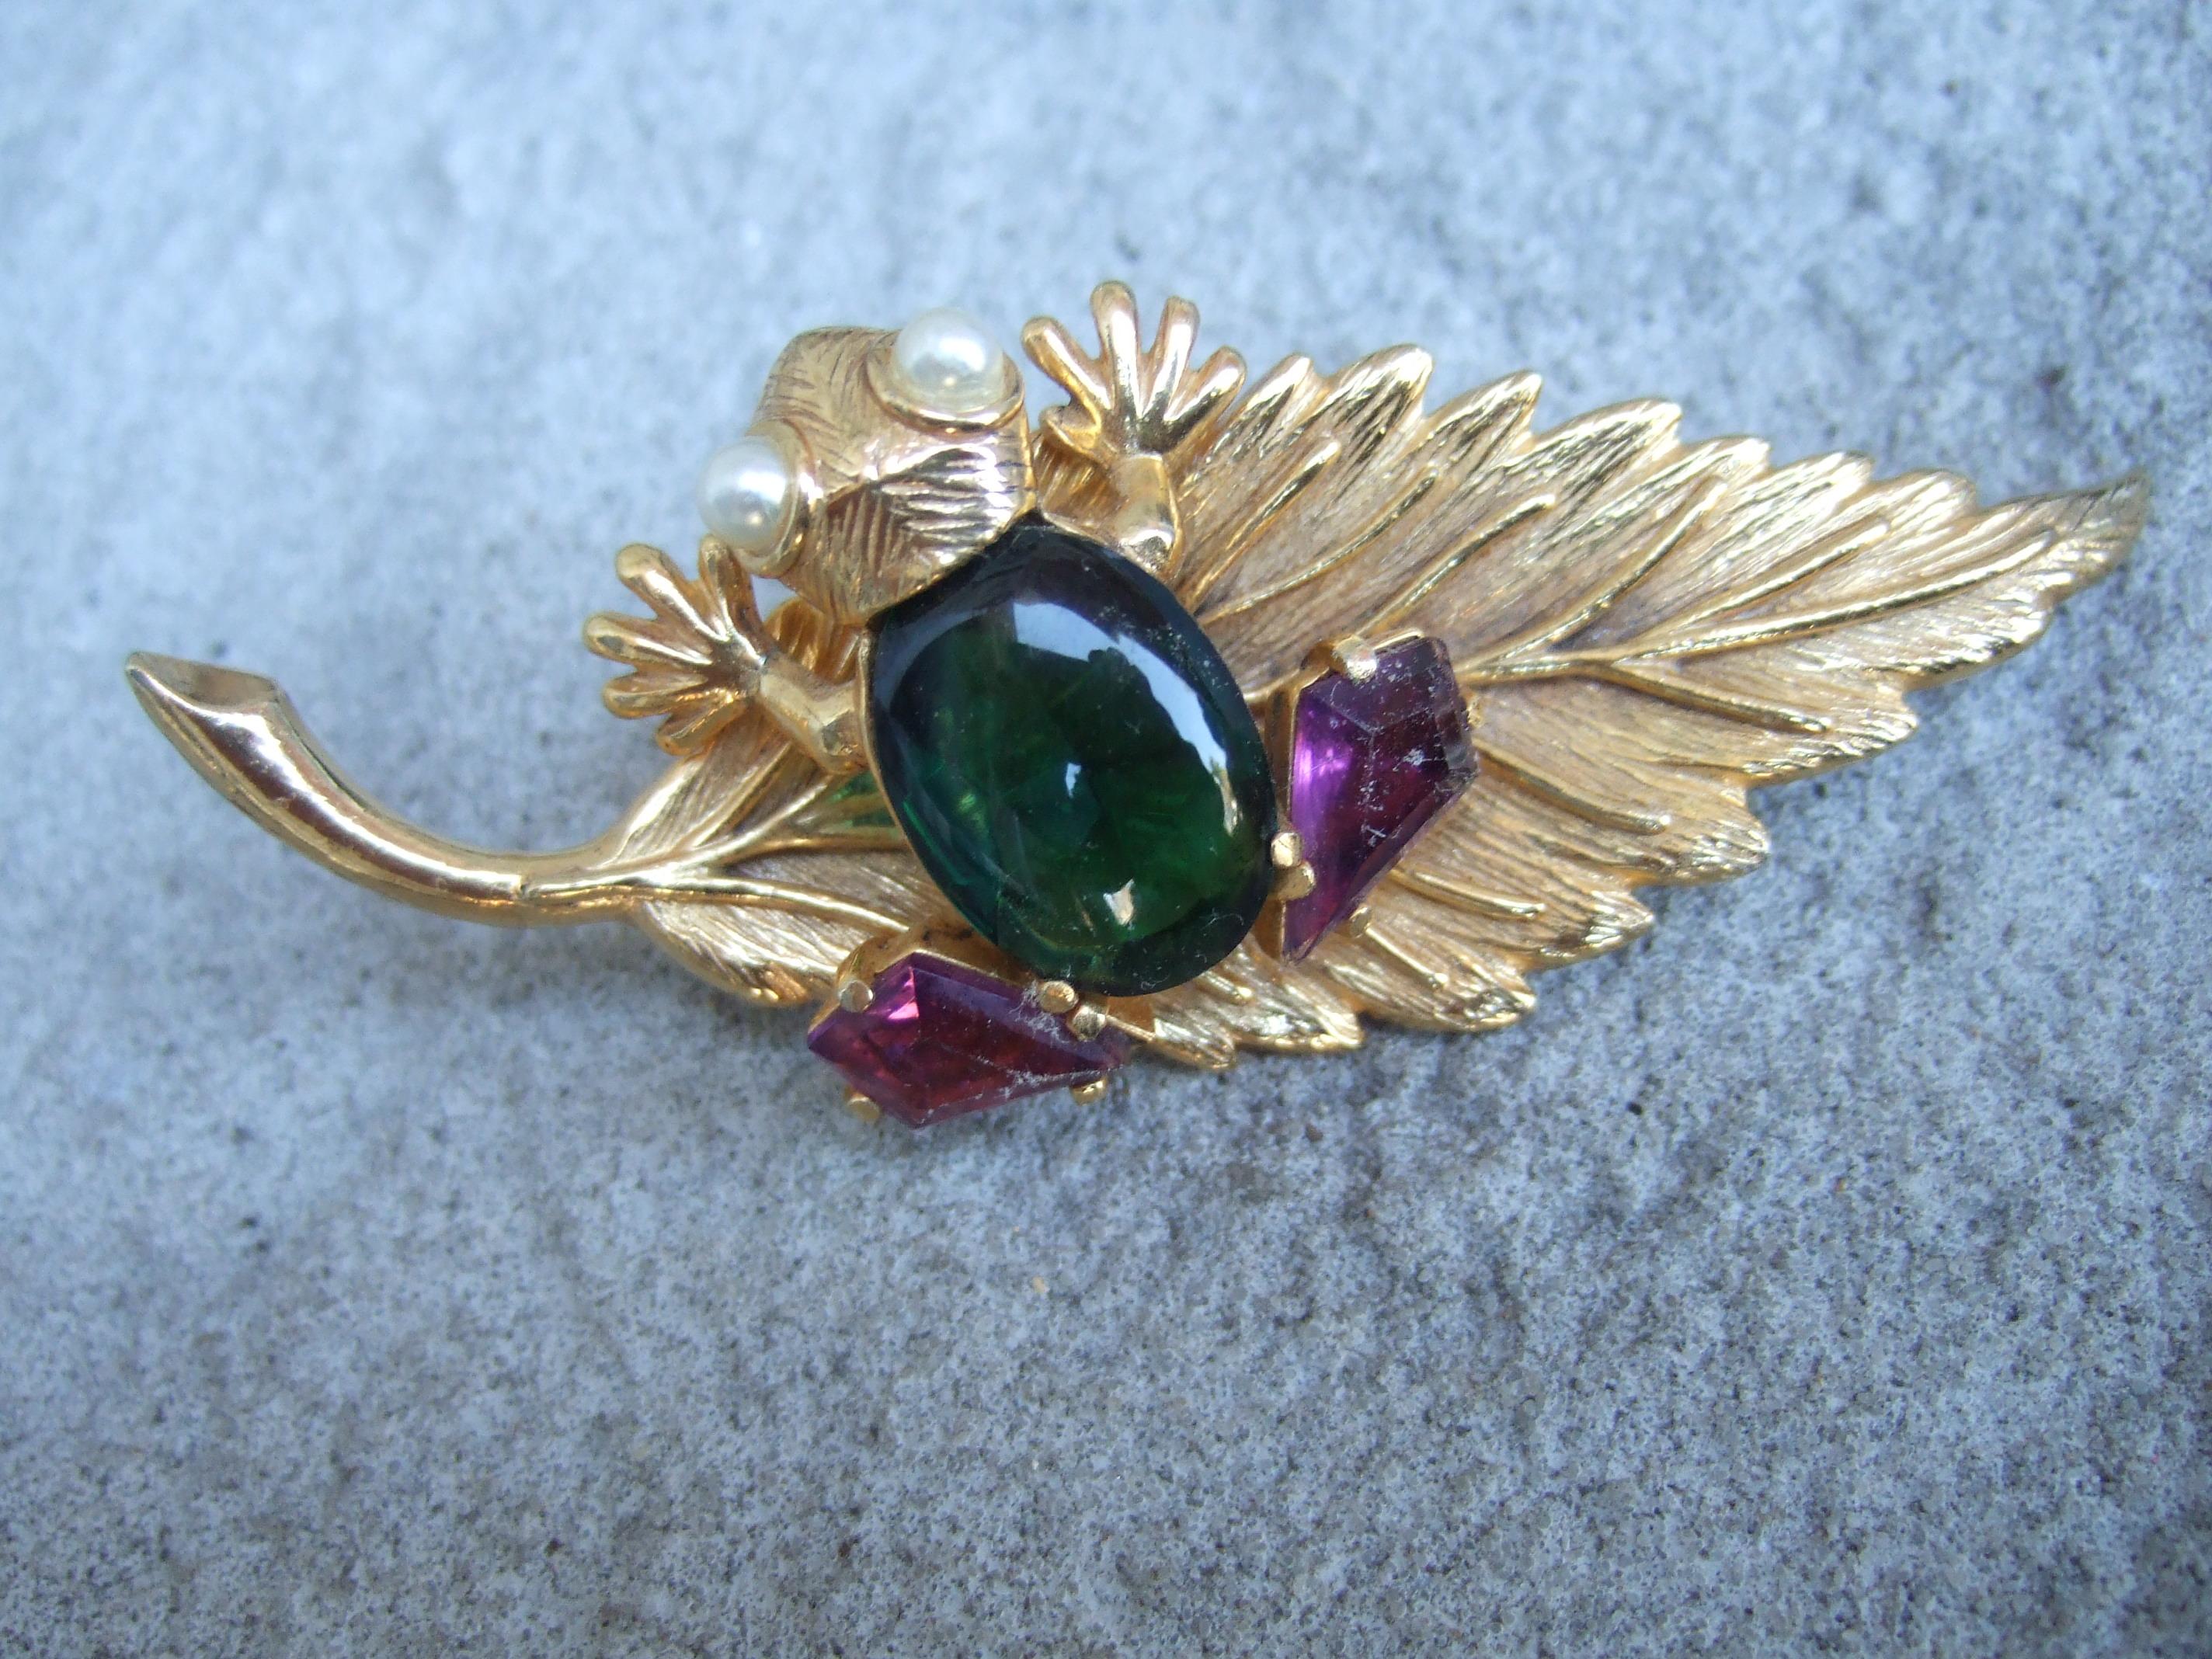 Schiaparelli Rare Charming Jeweled Frog Brooch c 1960 In Excellent Condition For Sale In University City, MO